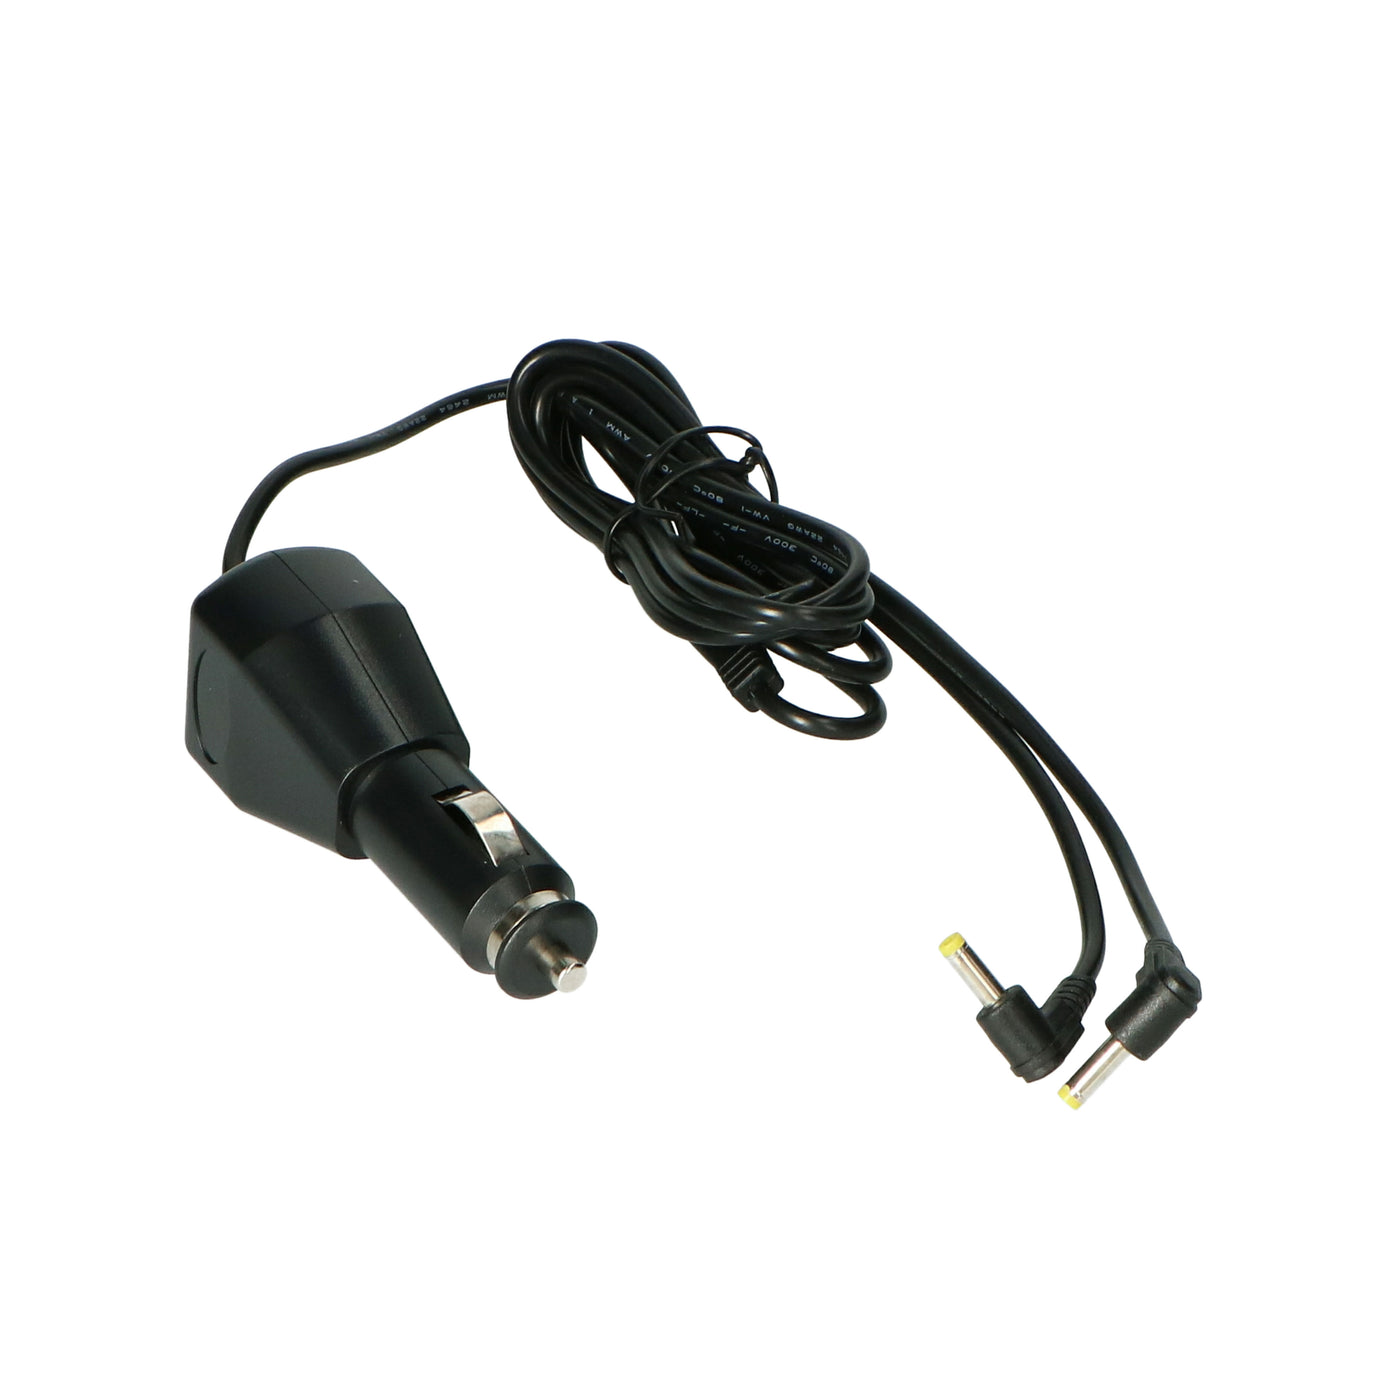 P000725 - Car adapter DVP double connector